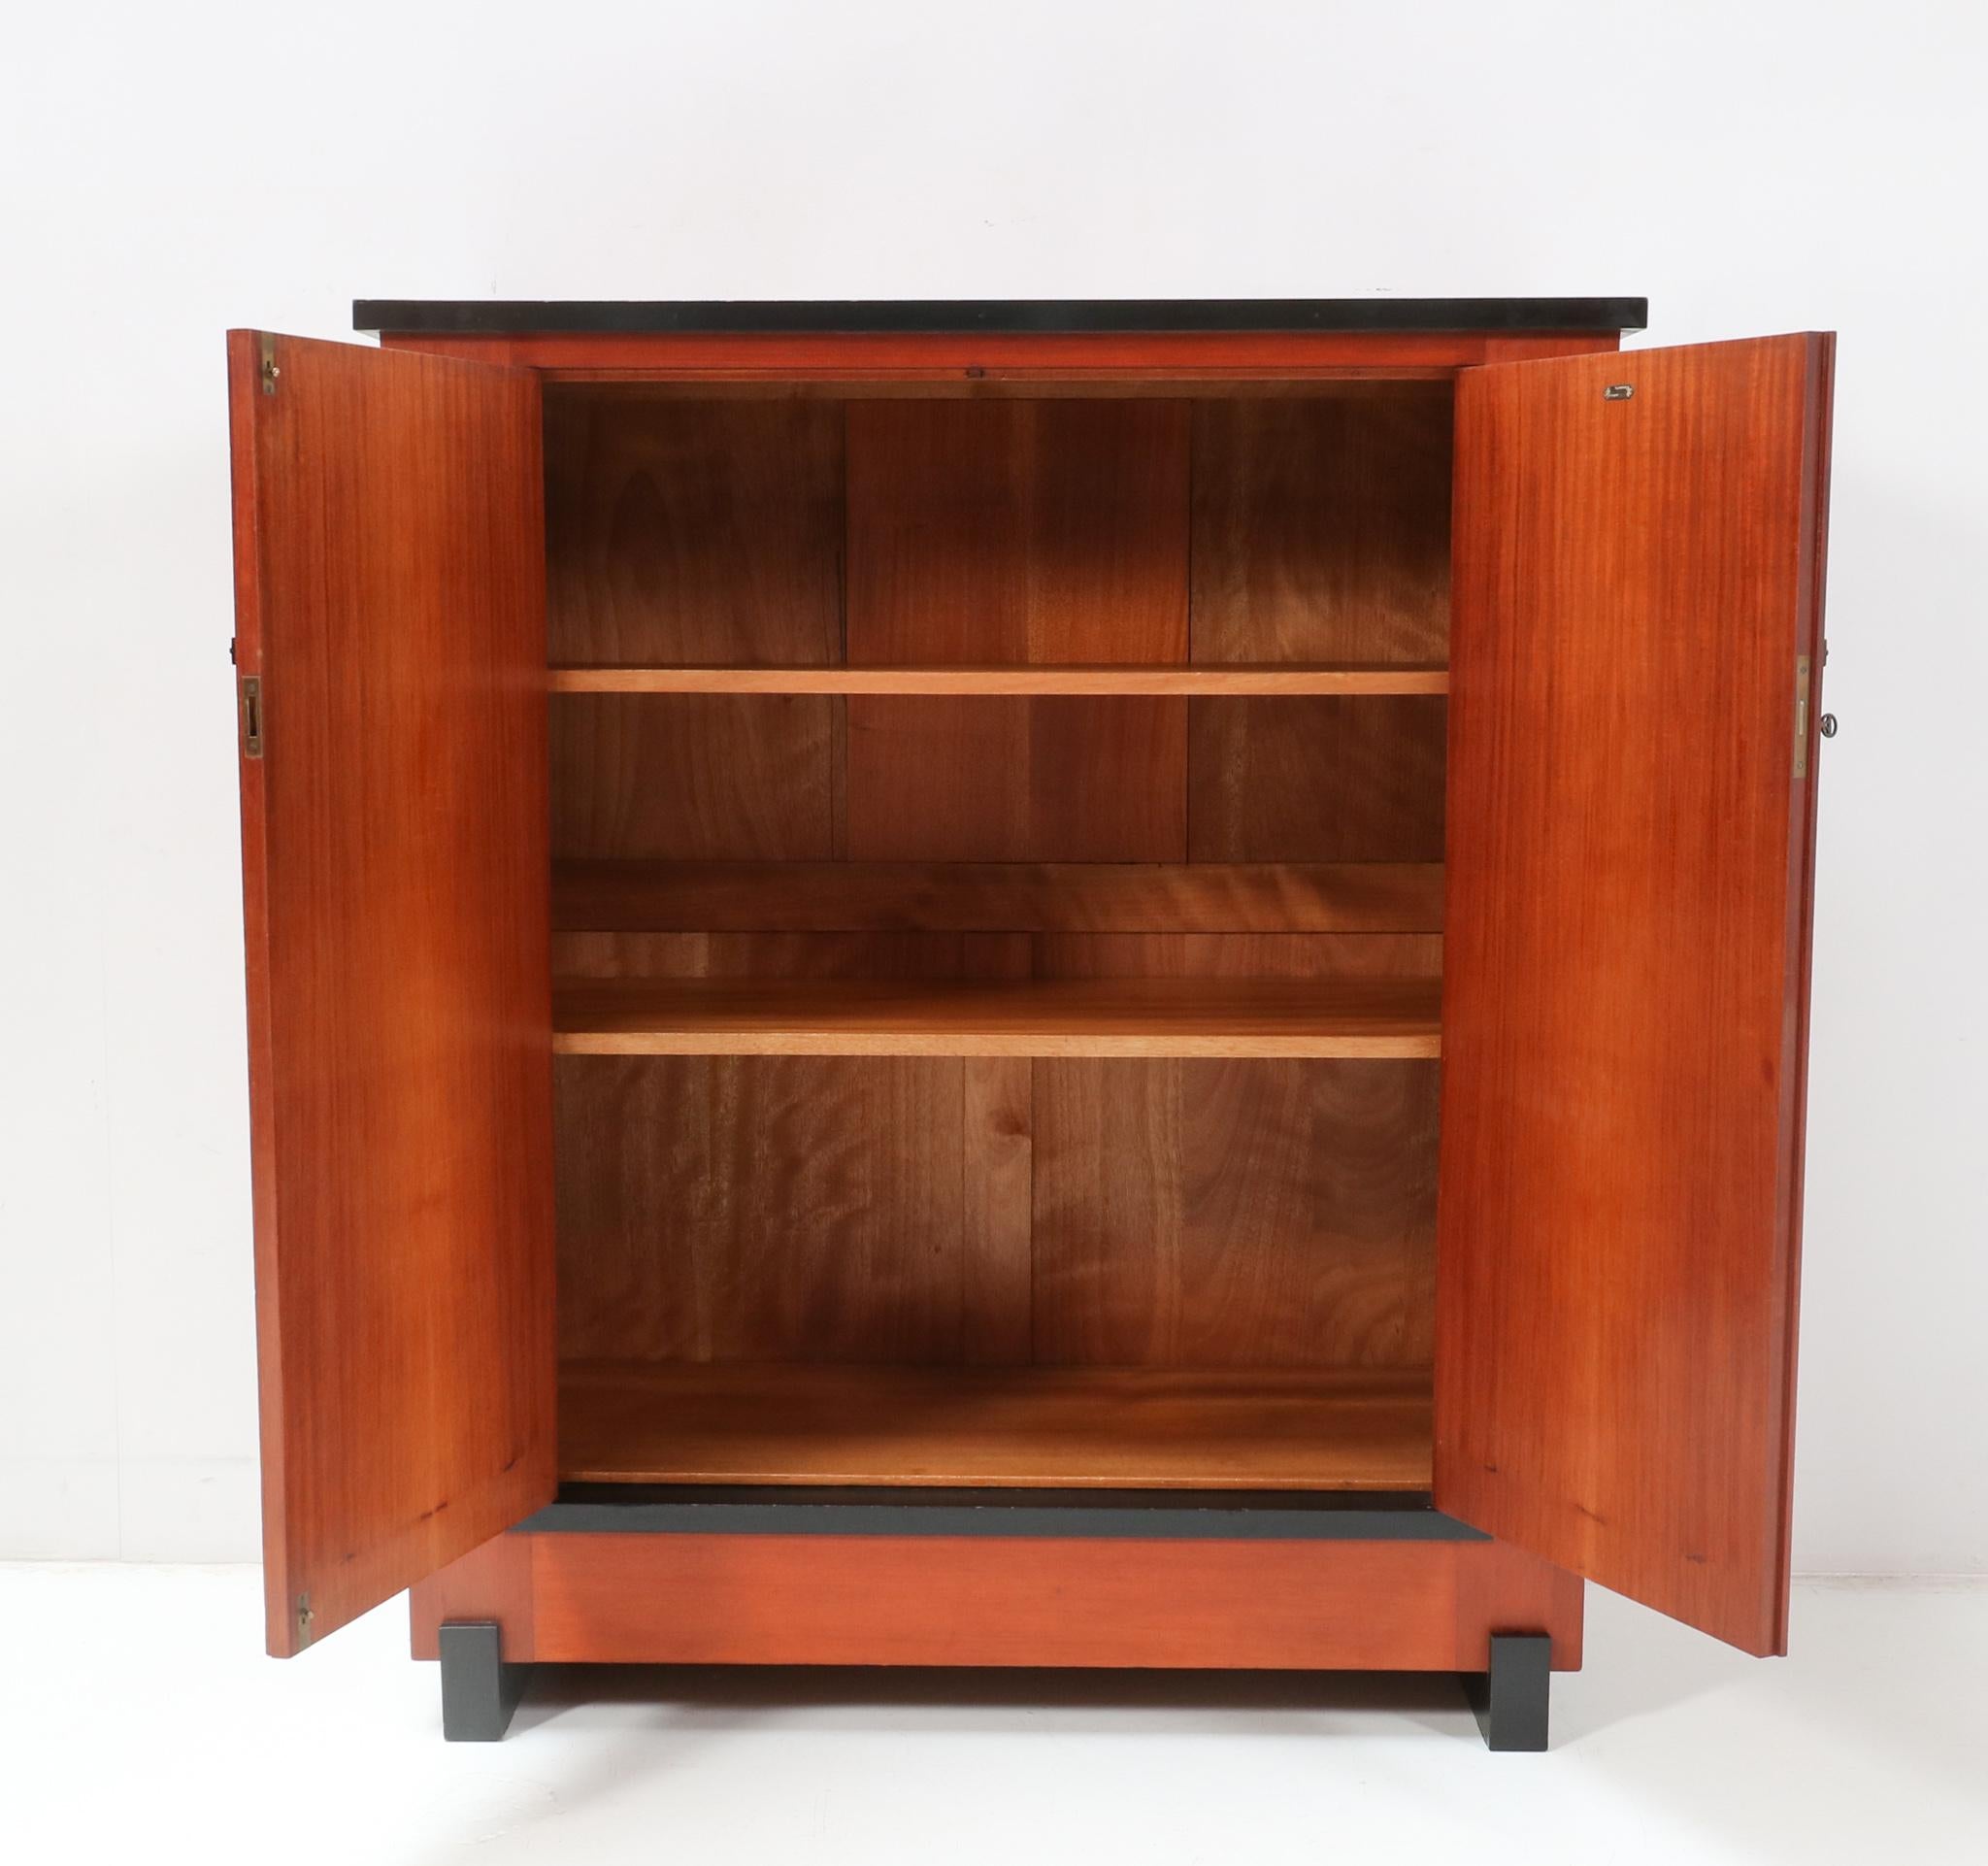 Early 20th Century Padouk Art Deco Modernist Cabinet by Hendrik Wouda for H. Pander & Zonen, 1920s